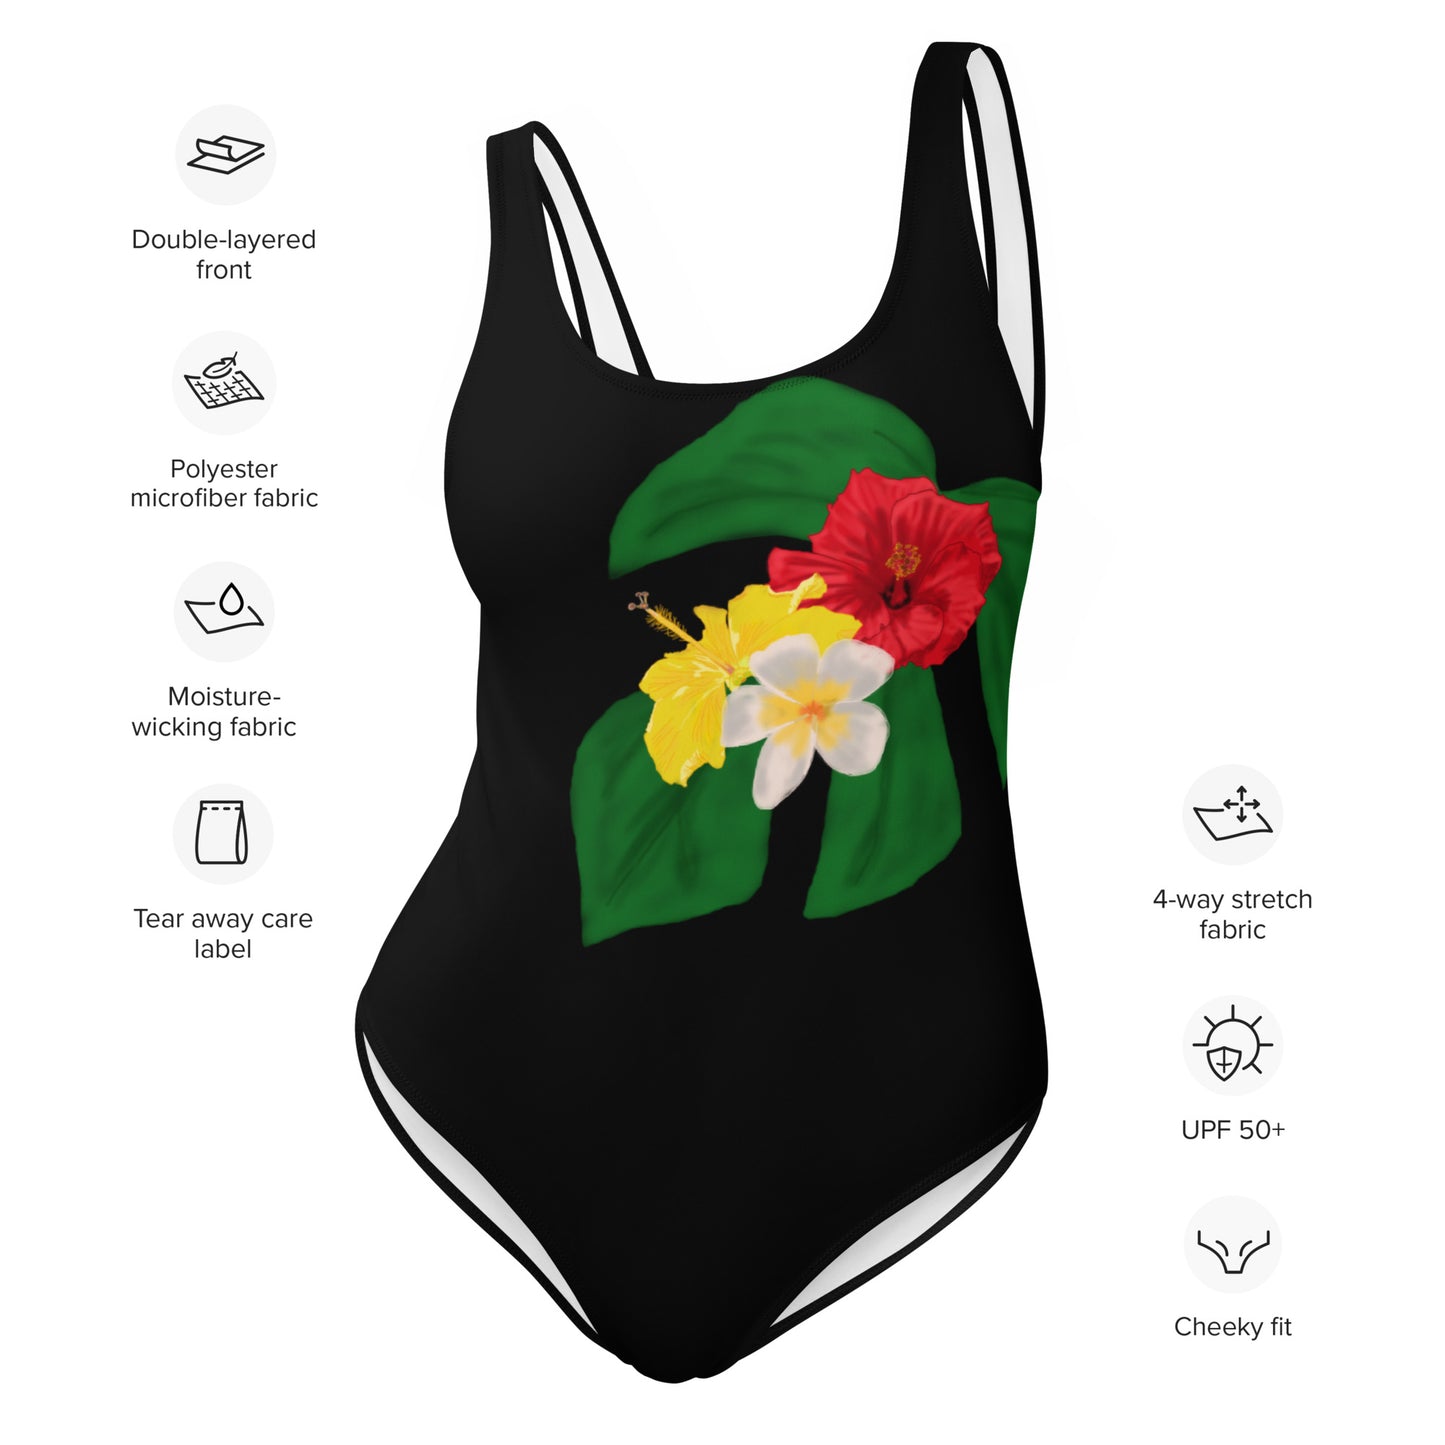 Tropical Flowers One-Piece Swimsuit